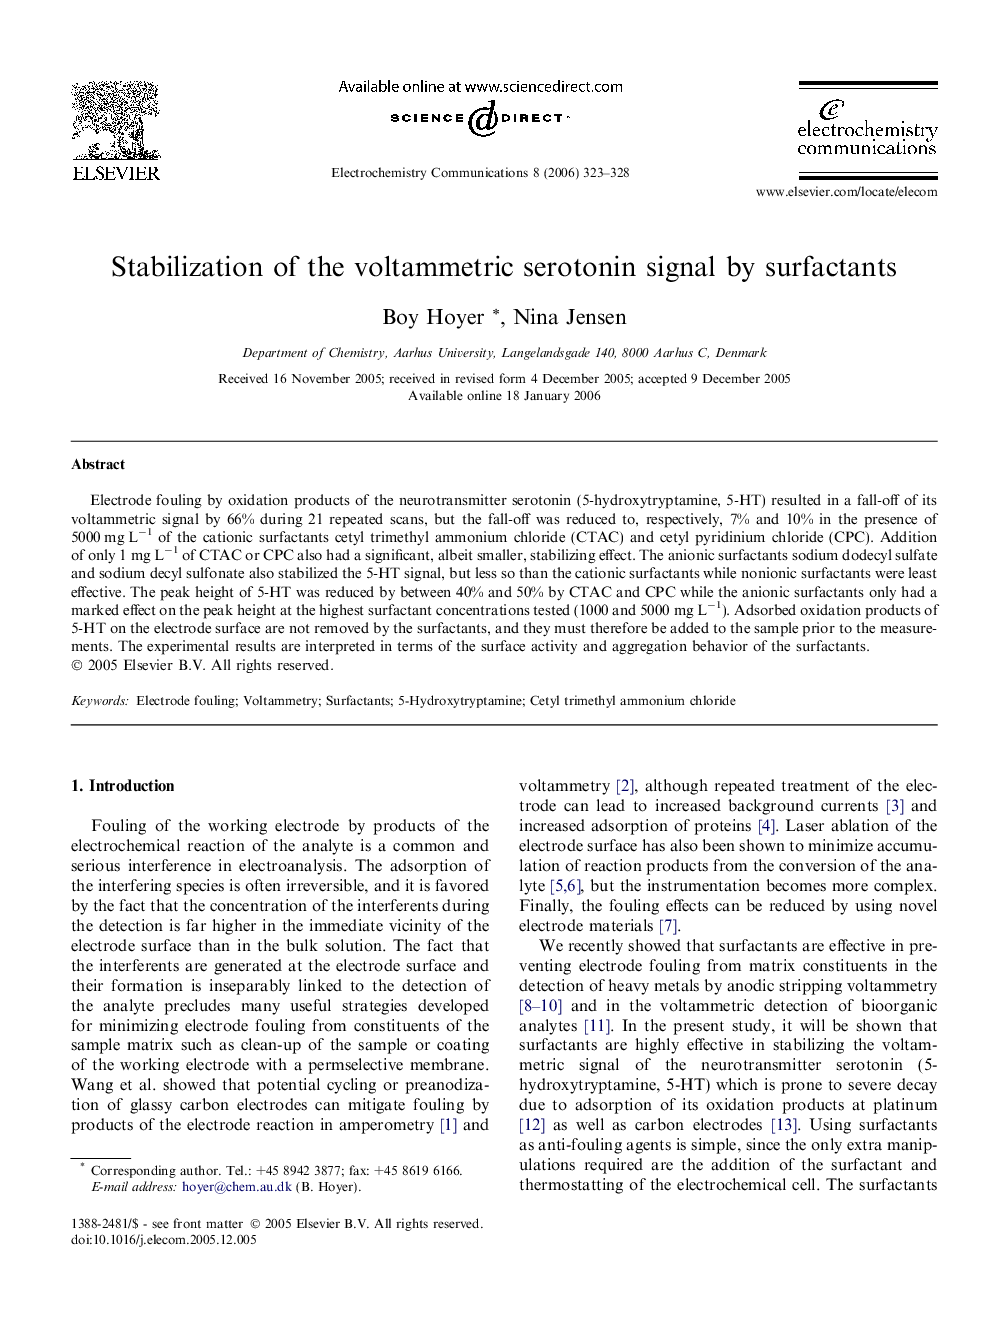 Stabilization of the voltammetric serotonin signal by surfactants